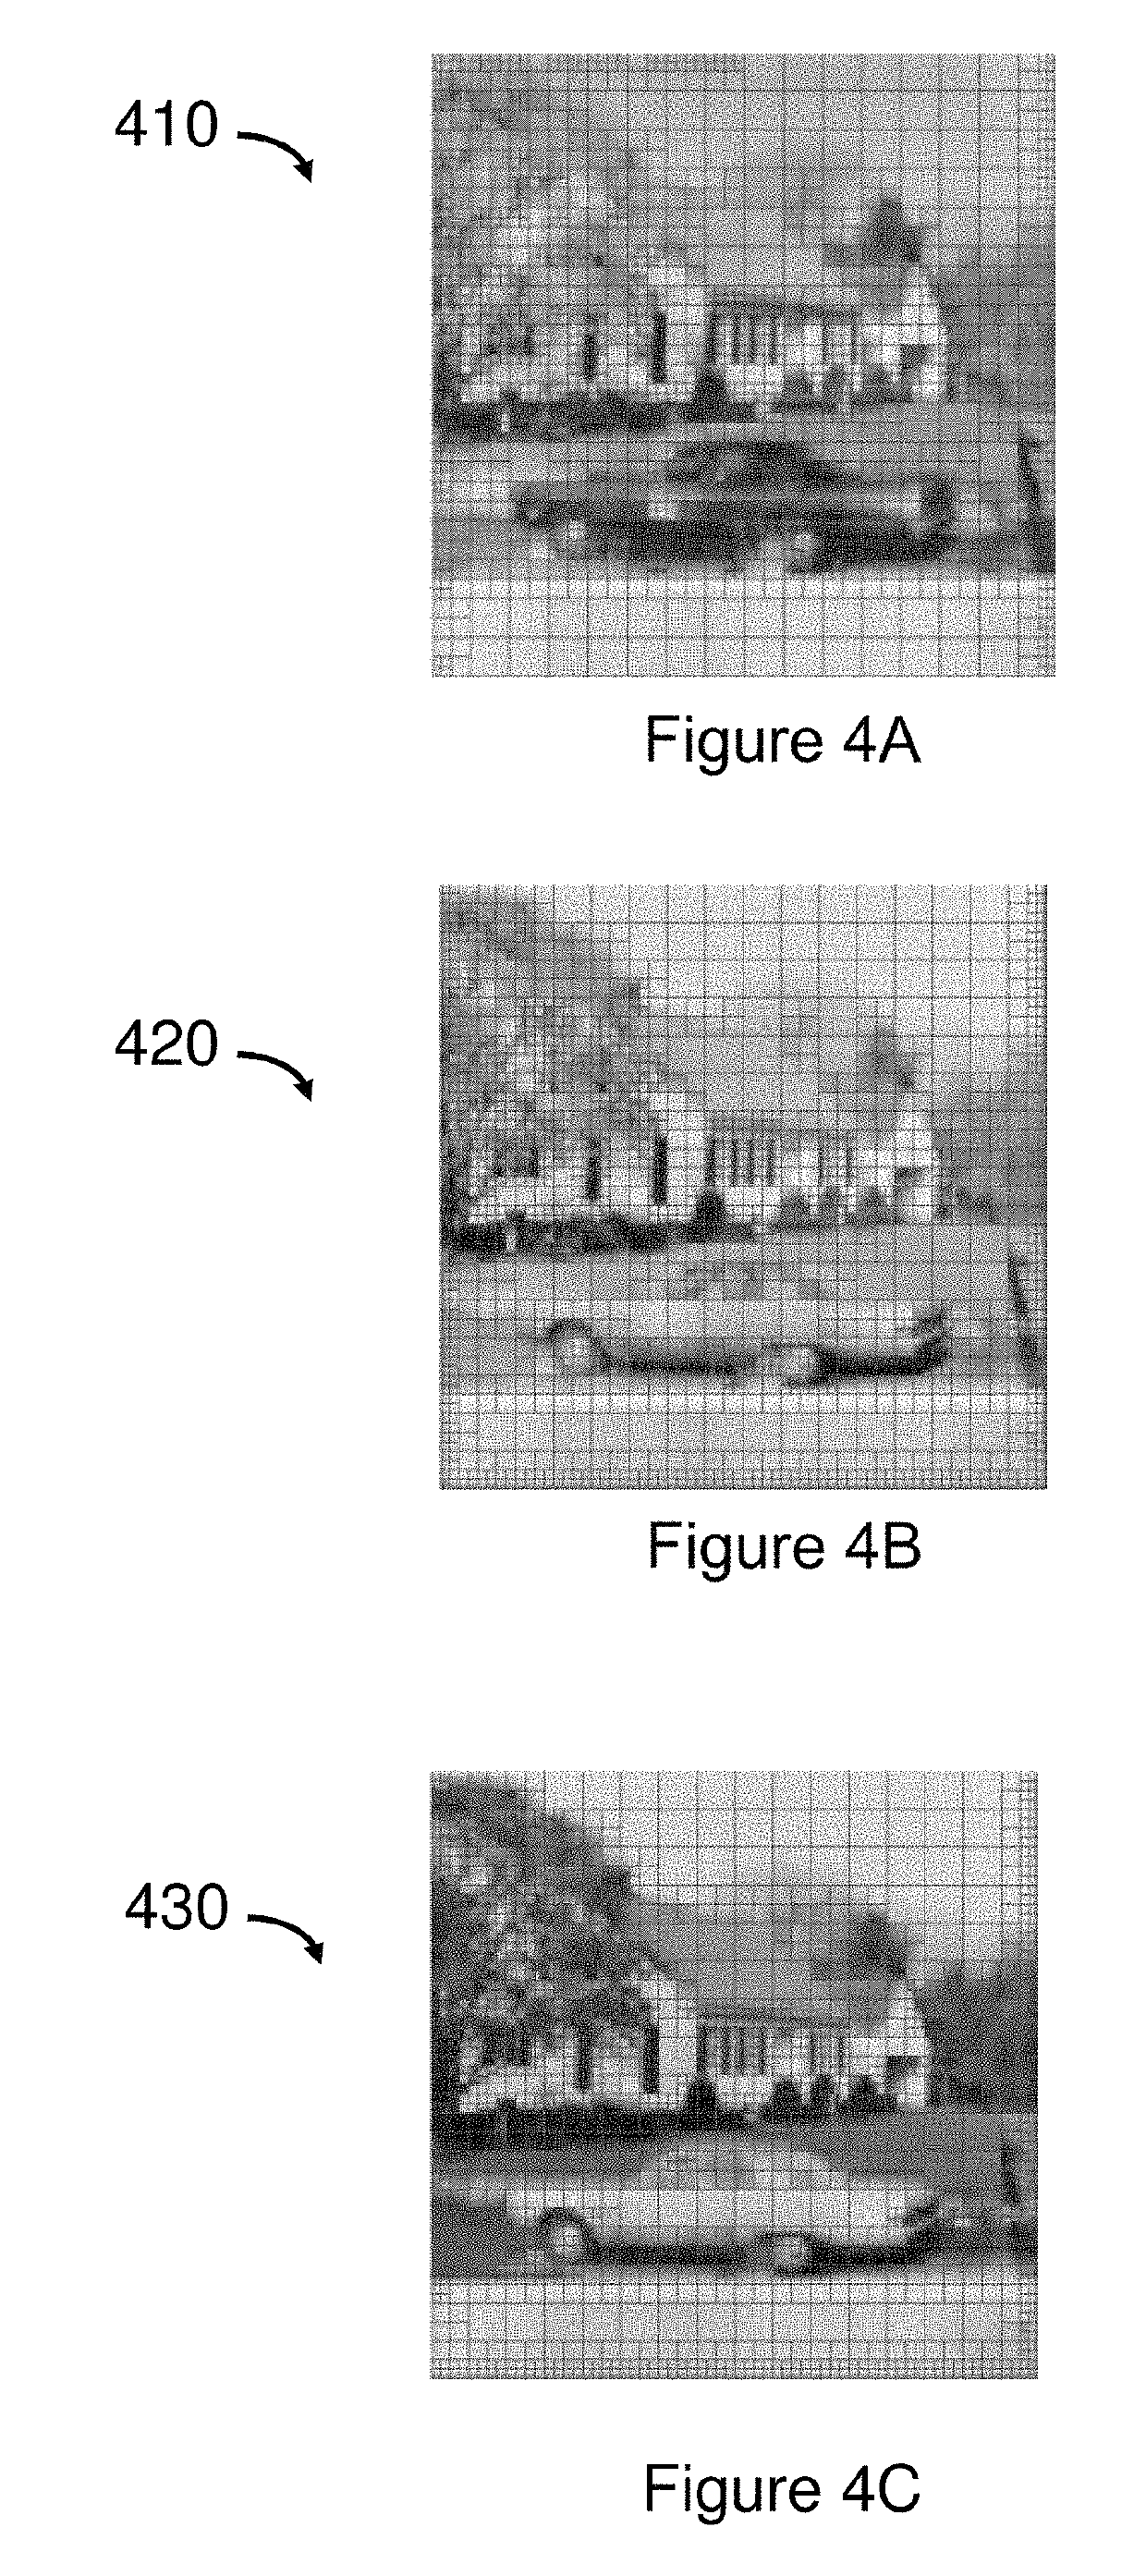 Methods and apparatus for color image watermarking